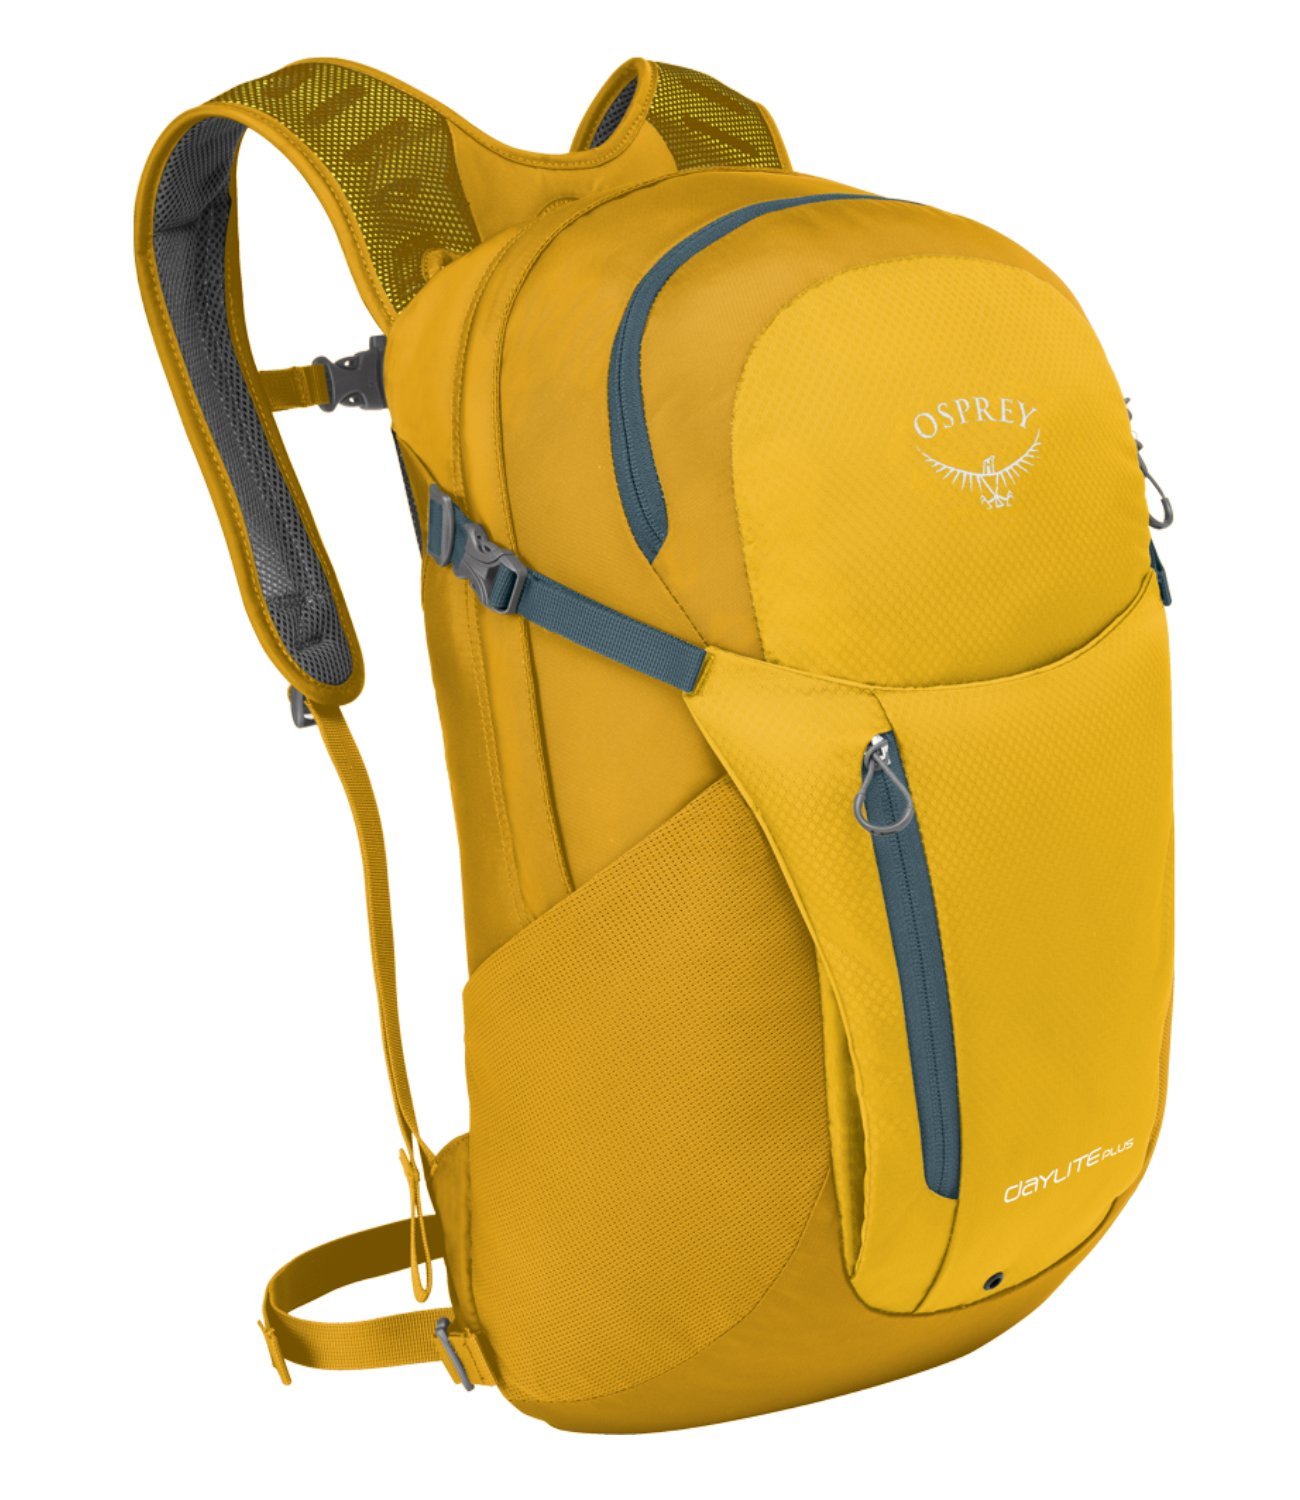 Osprey Packs Daylite Plus Daypack Review-Built Tough